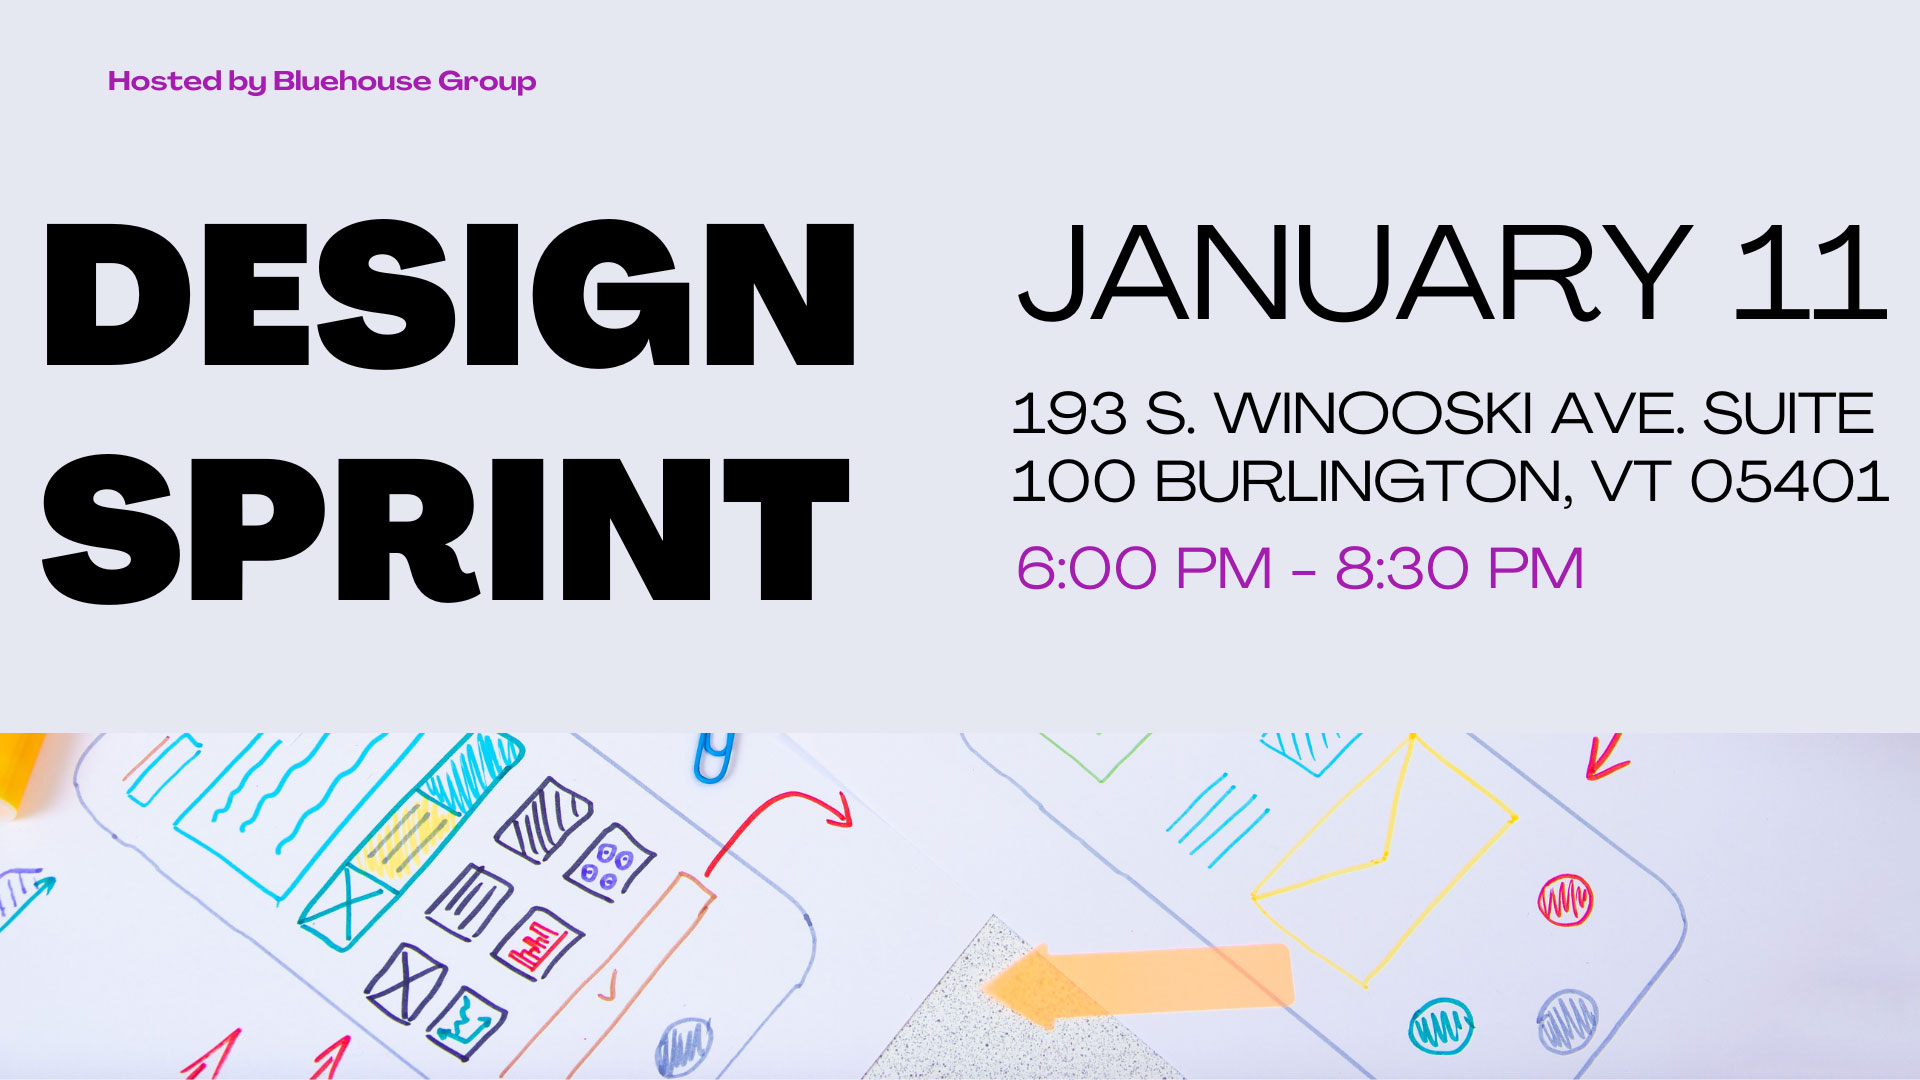 A cover image for an event. The left side of the image reads “DESIGN SPRINT” in large bold text with “Hosted by Bluehouse Group” above it. On the right side of the image reads “January 11th” with Bluehouse Group’s address underneath “193. South Winooski Ave. Suite 100 Burlington, VT 05401” with the time 6:00 PM - 8 PM.